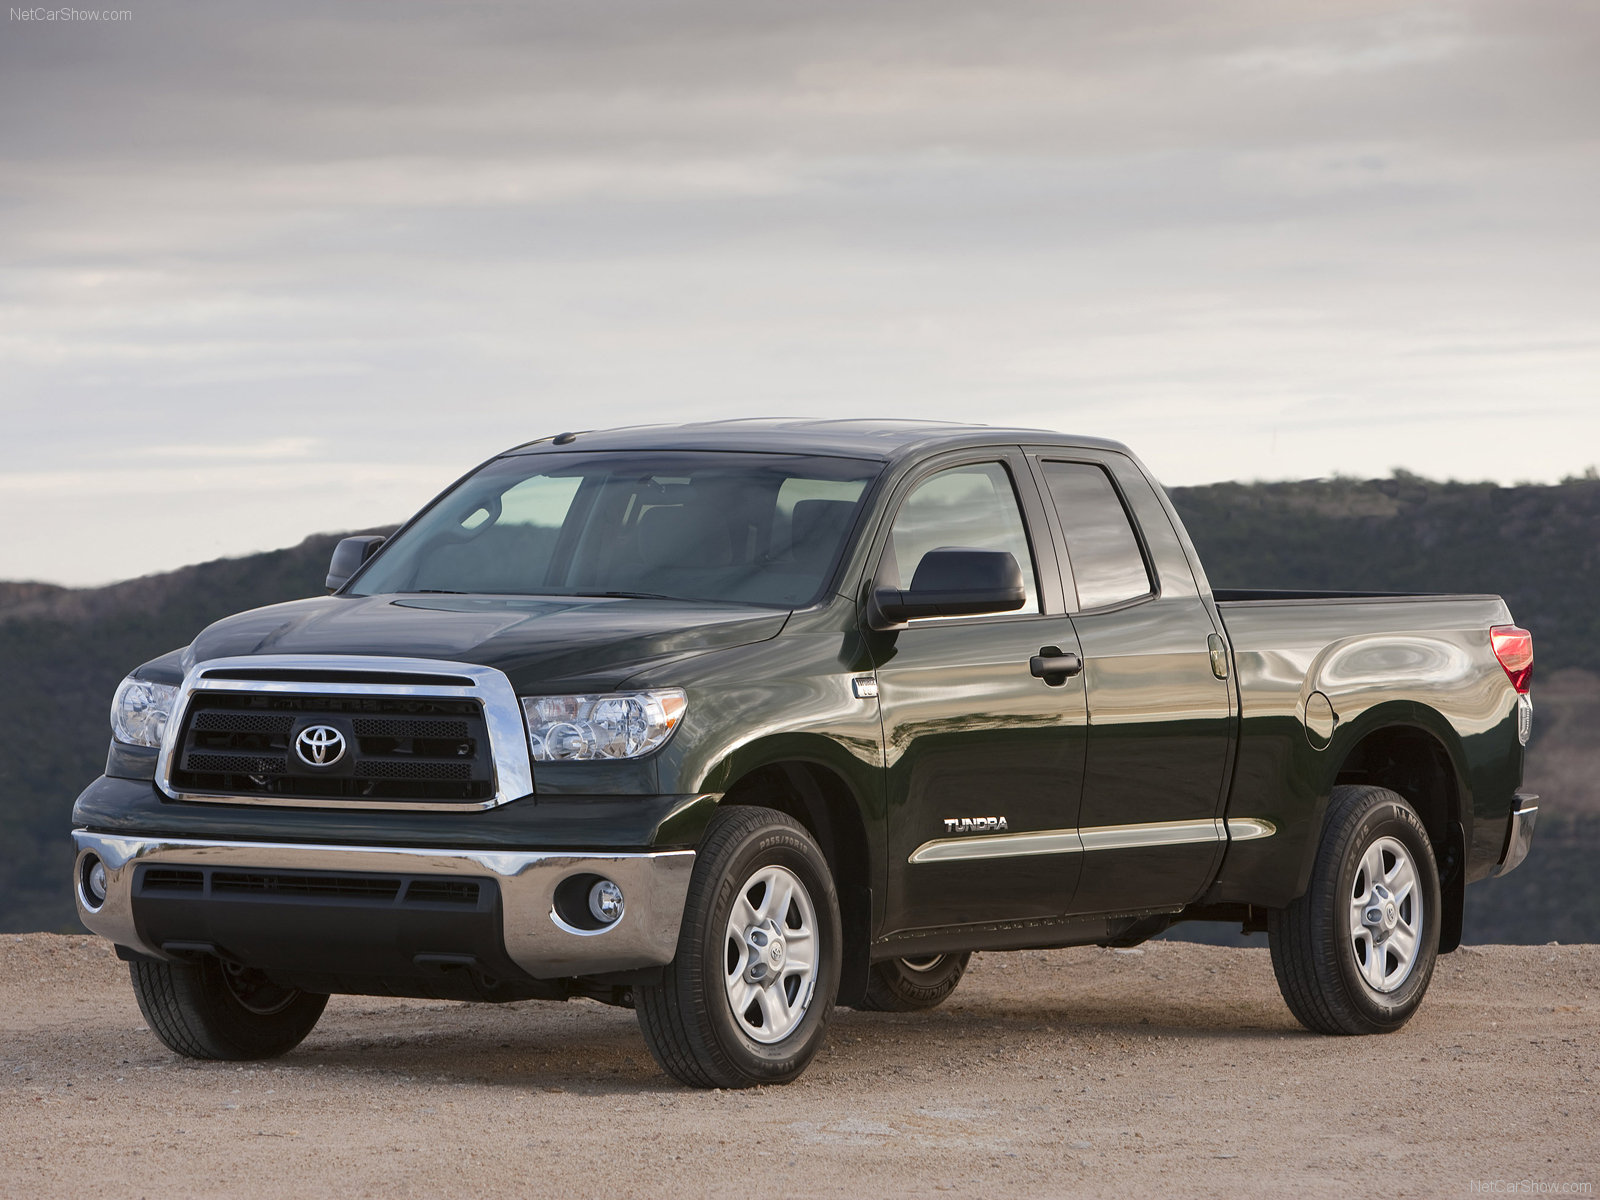 Toyota Tundra Wallpapers - image #364